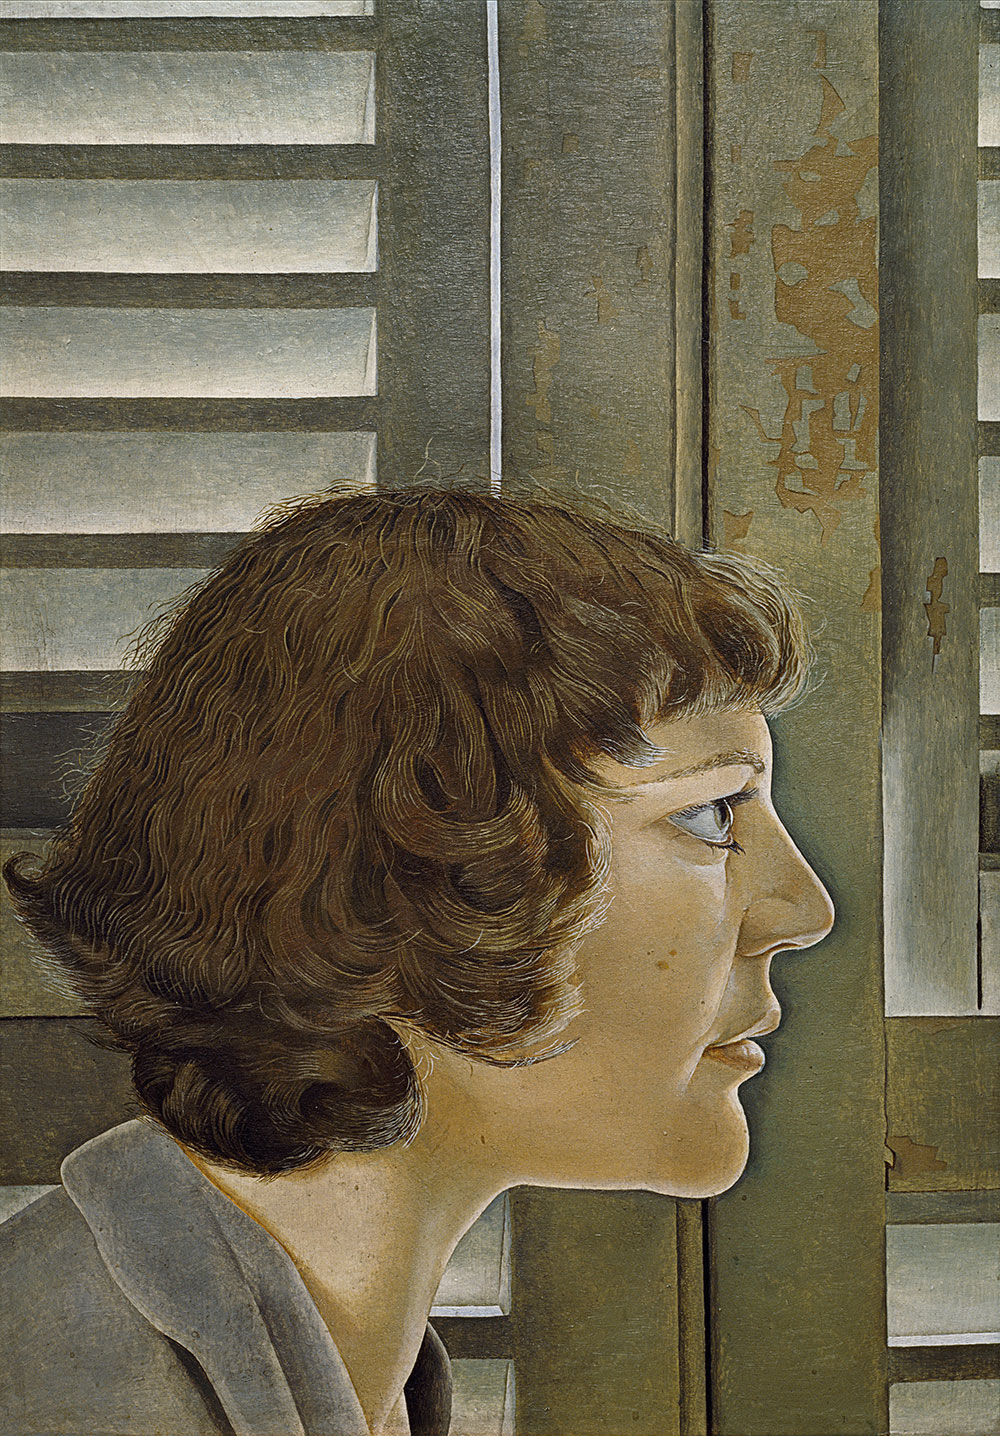 Lucian Freud, Portrait of Kitty, 1948–9, oil on panel, 35 × 24 cm, 13¾ × 9½ in. © The Lucian Freud Archive / Bridgeman Images; photography by John Riddy (volume 1, page 166)